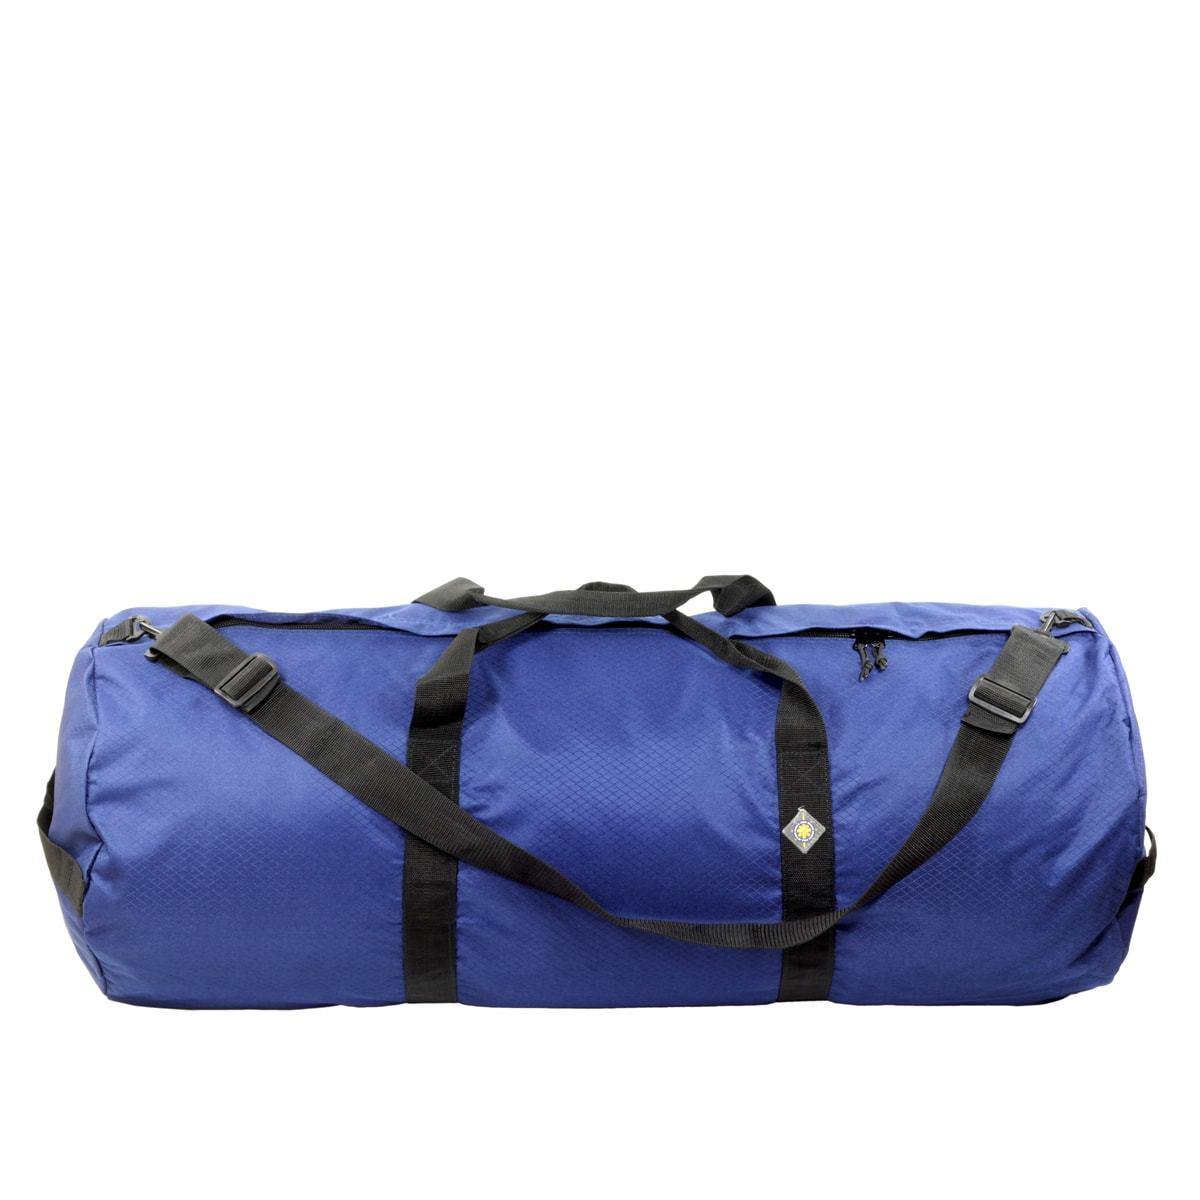 Studio photo the Pacific Blue SD1640DLX Standard Duffle by Northstar Bags. 131 liter duffel with diamond ripstop fabric, thick webbing straps, and a large format metal zipper. Guaranteed for life.